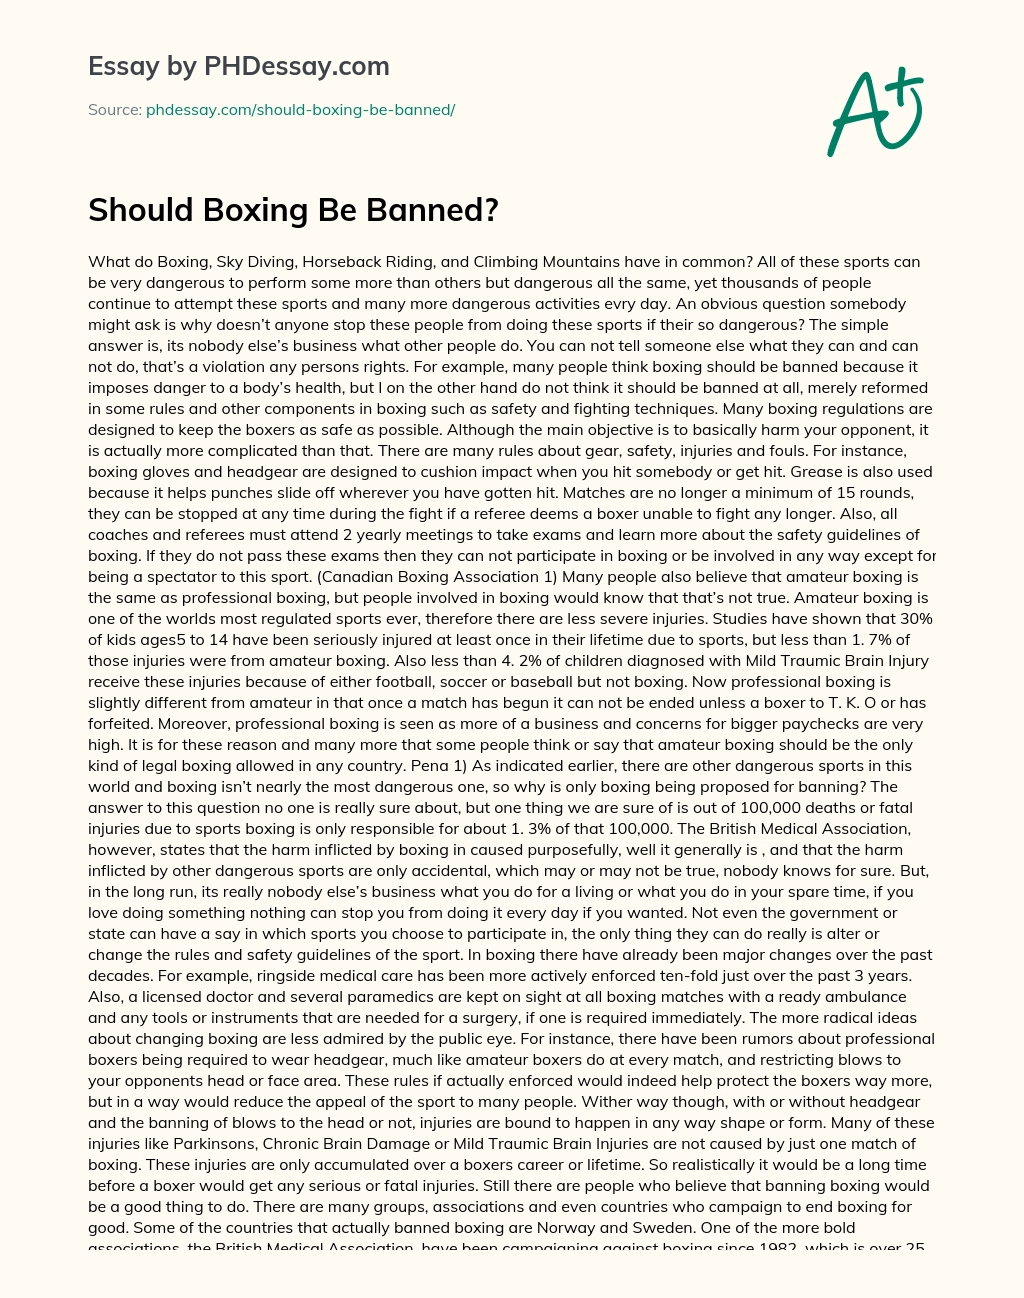 Should Boxing Be Banned? essay